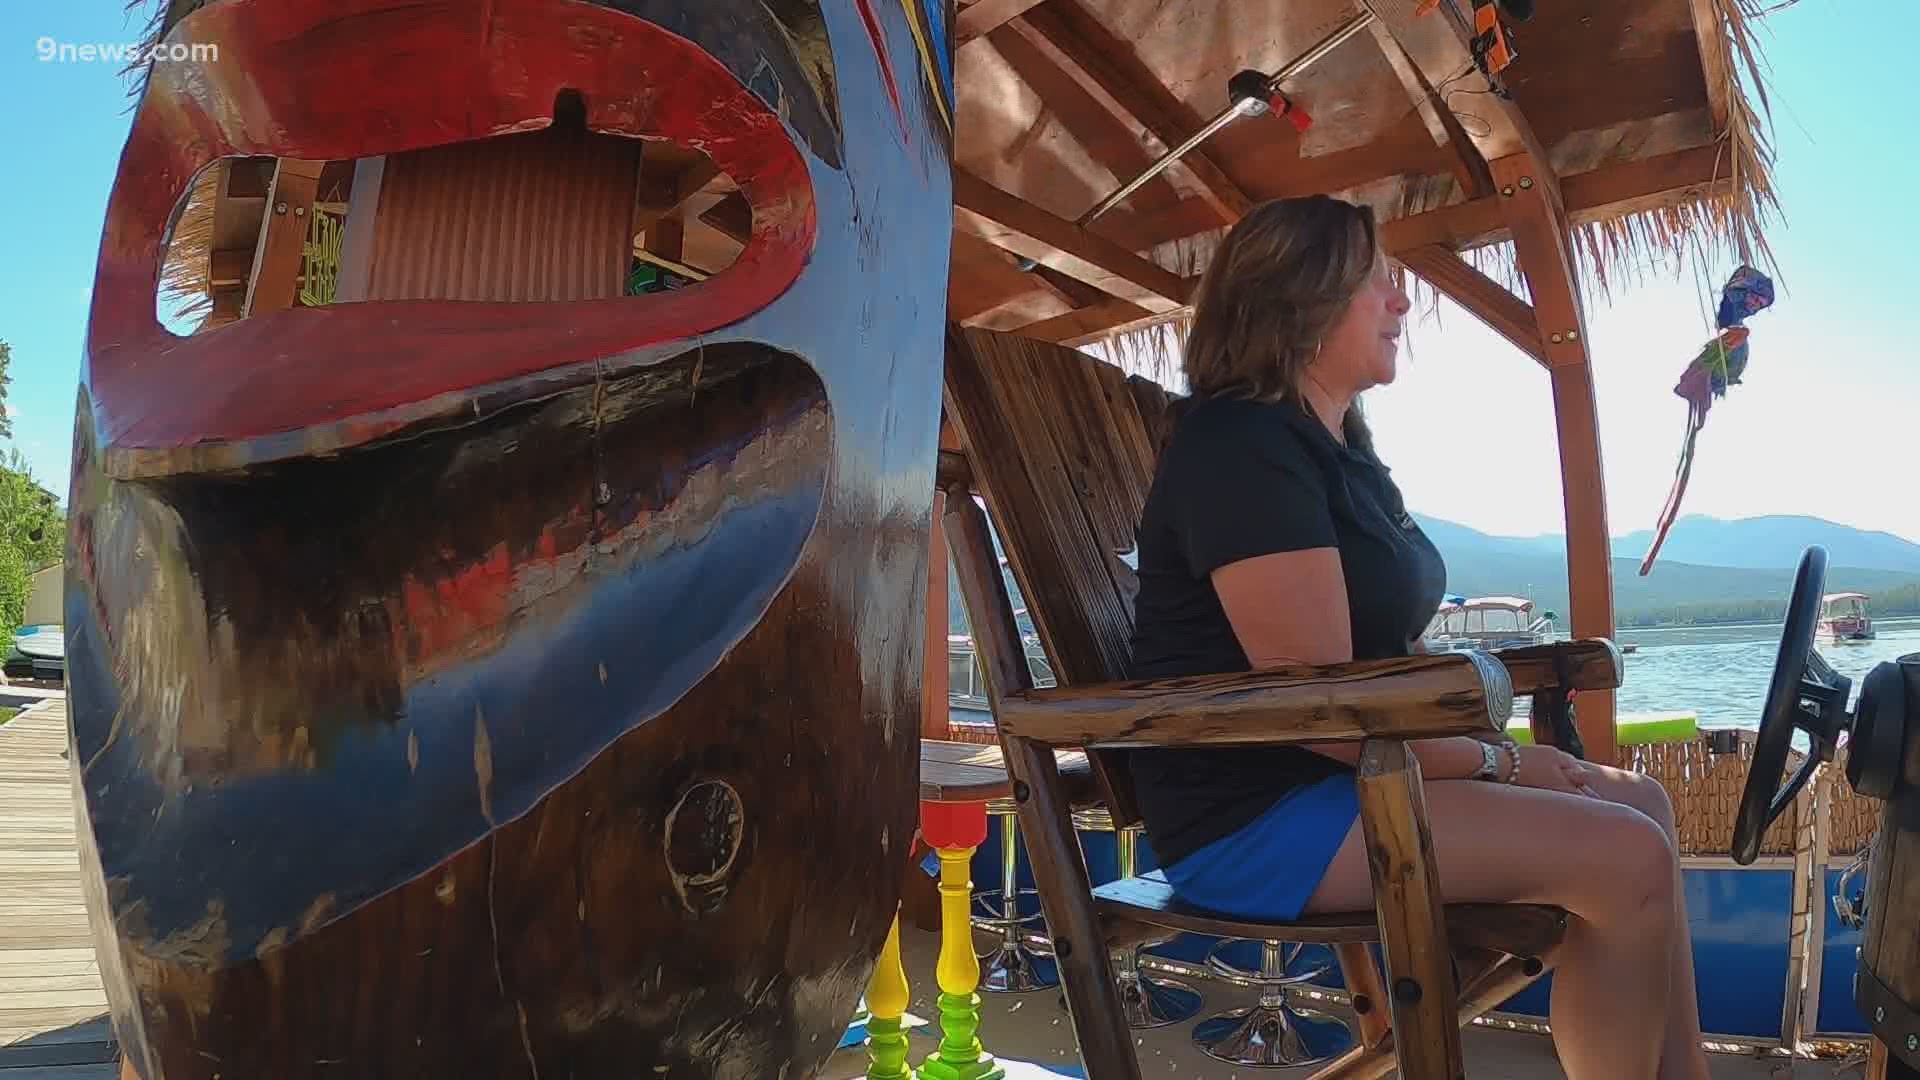 Businesses are getting creative to attract customers this summer and that’s the idea behind a unique, tiki-style boat at the Trail Ridge Marina in Grand Lake.